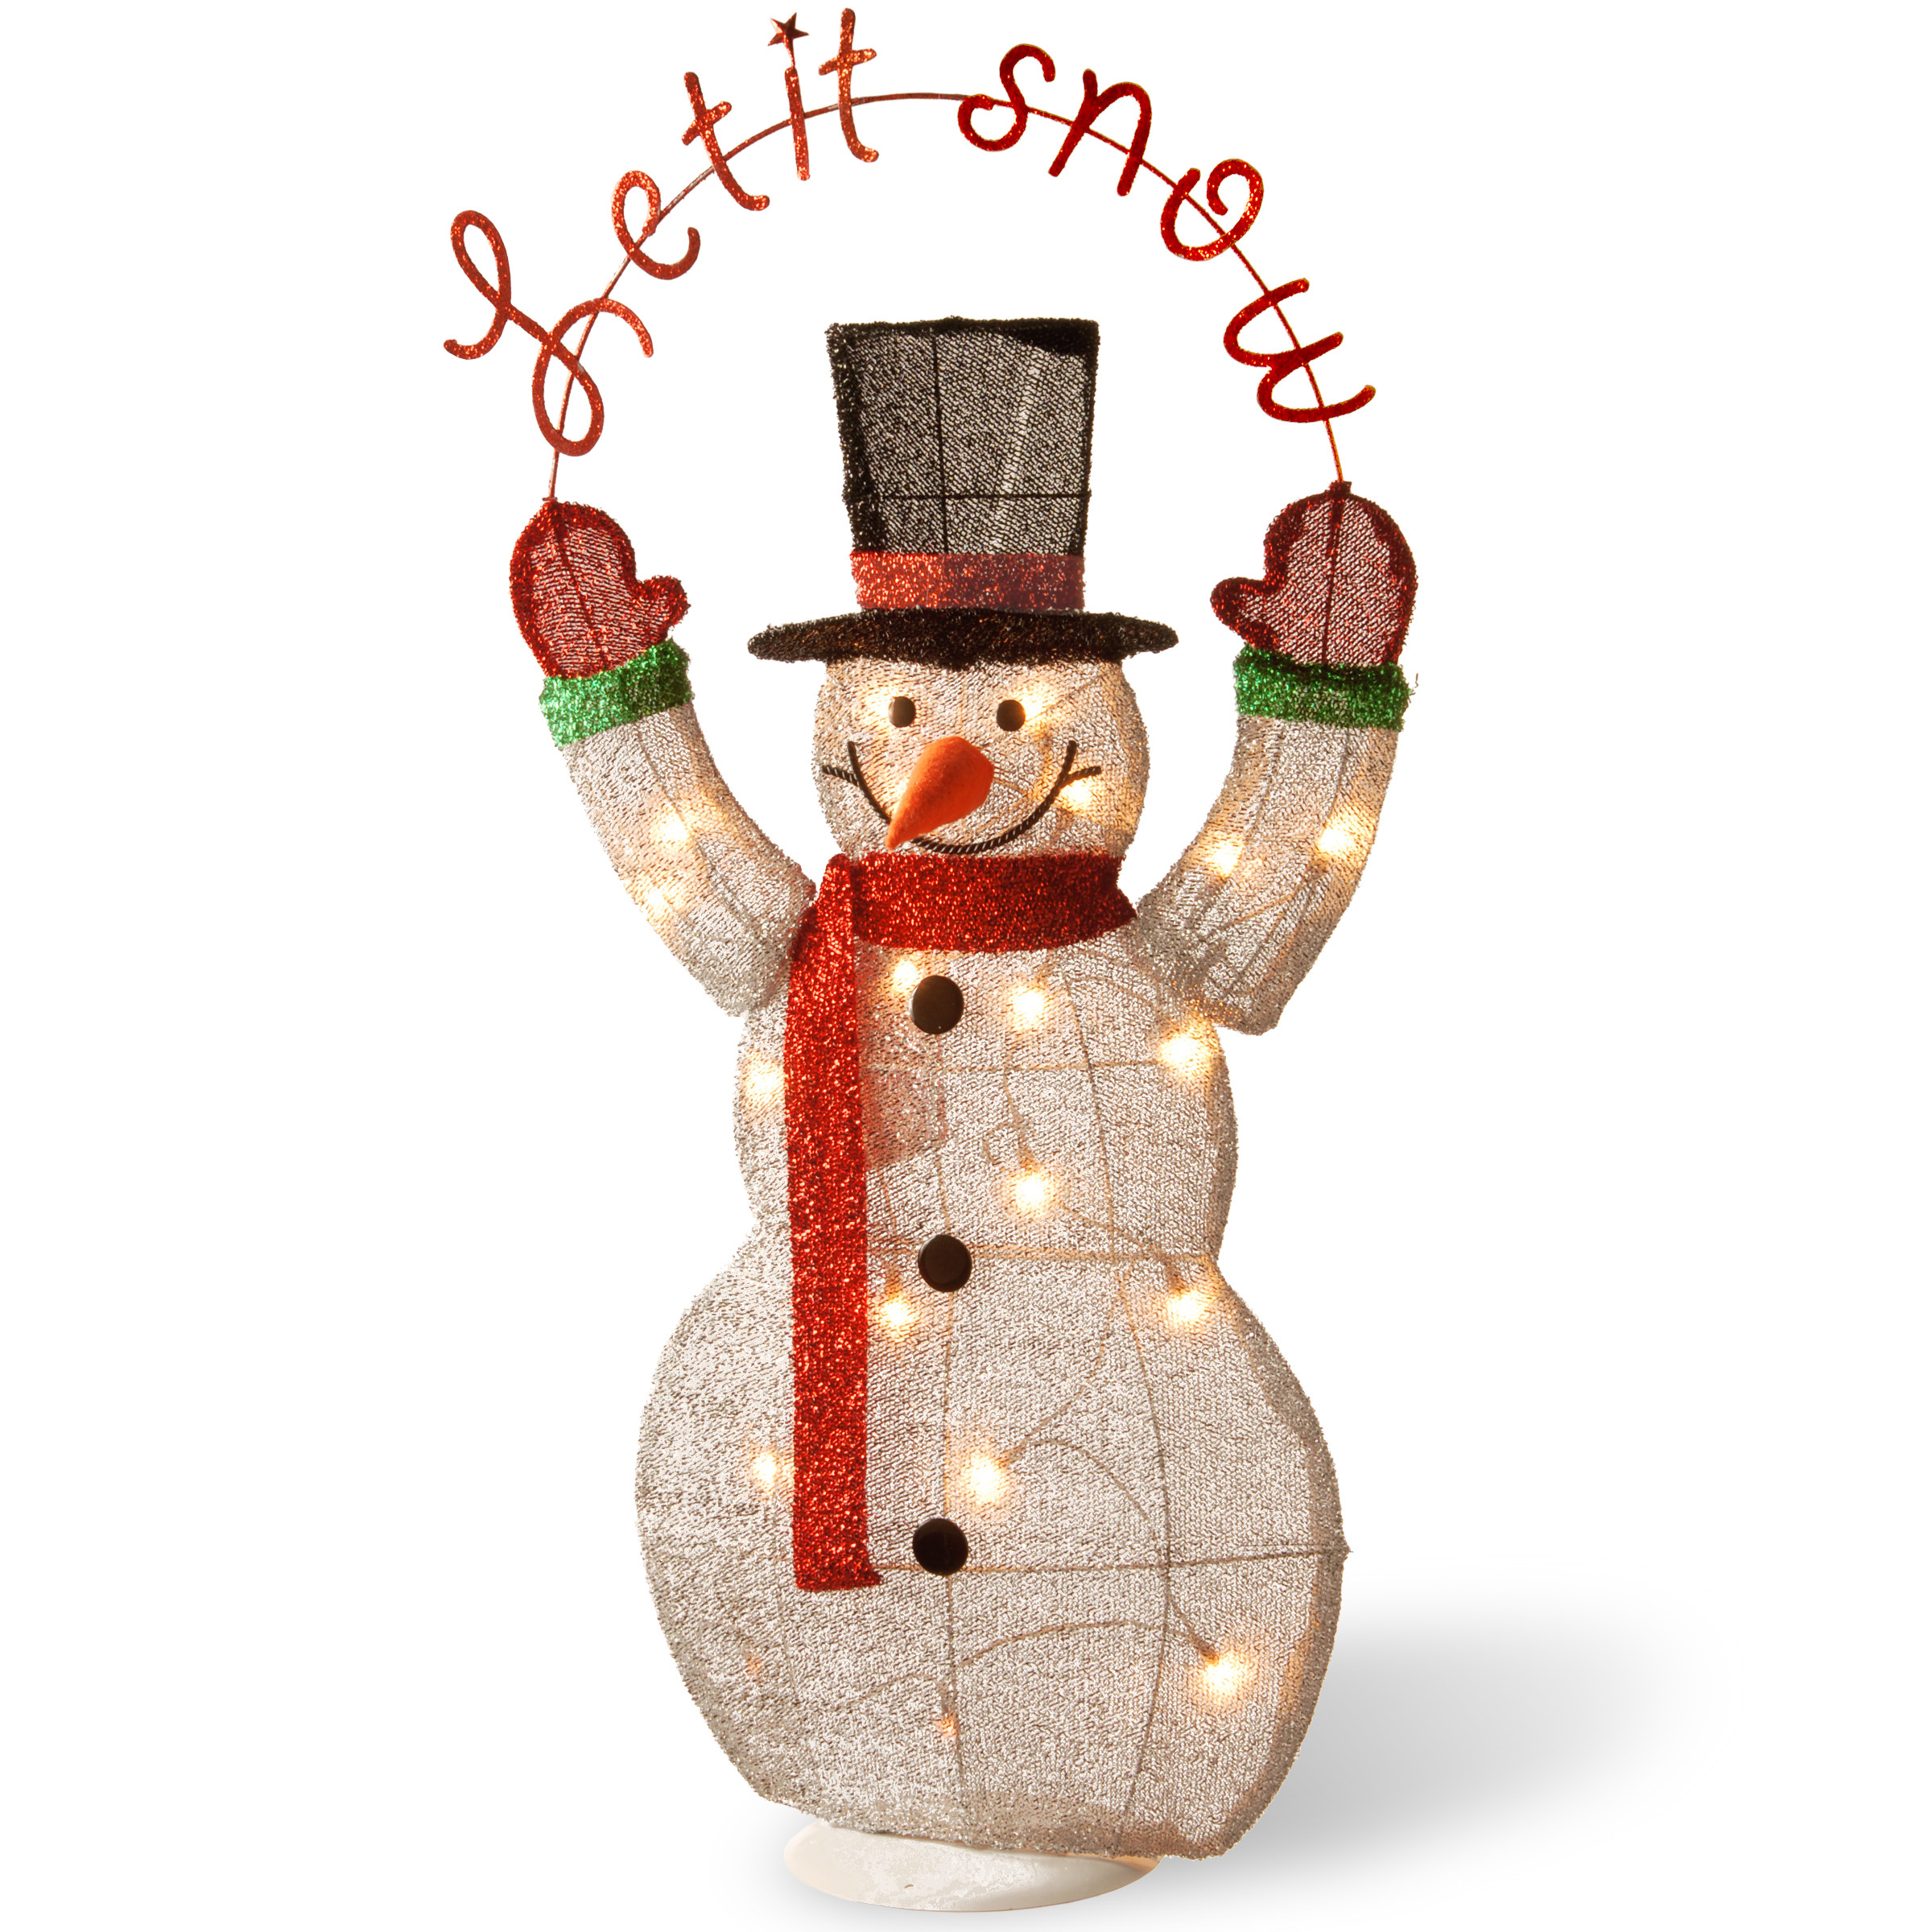 Lighted Outdoor Christmas Decorations
 Lighted Christmas Snowman Outdoor Indoor Decoration Yard